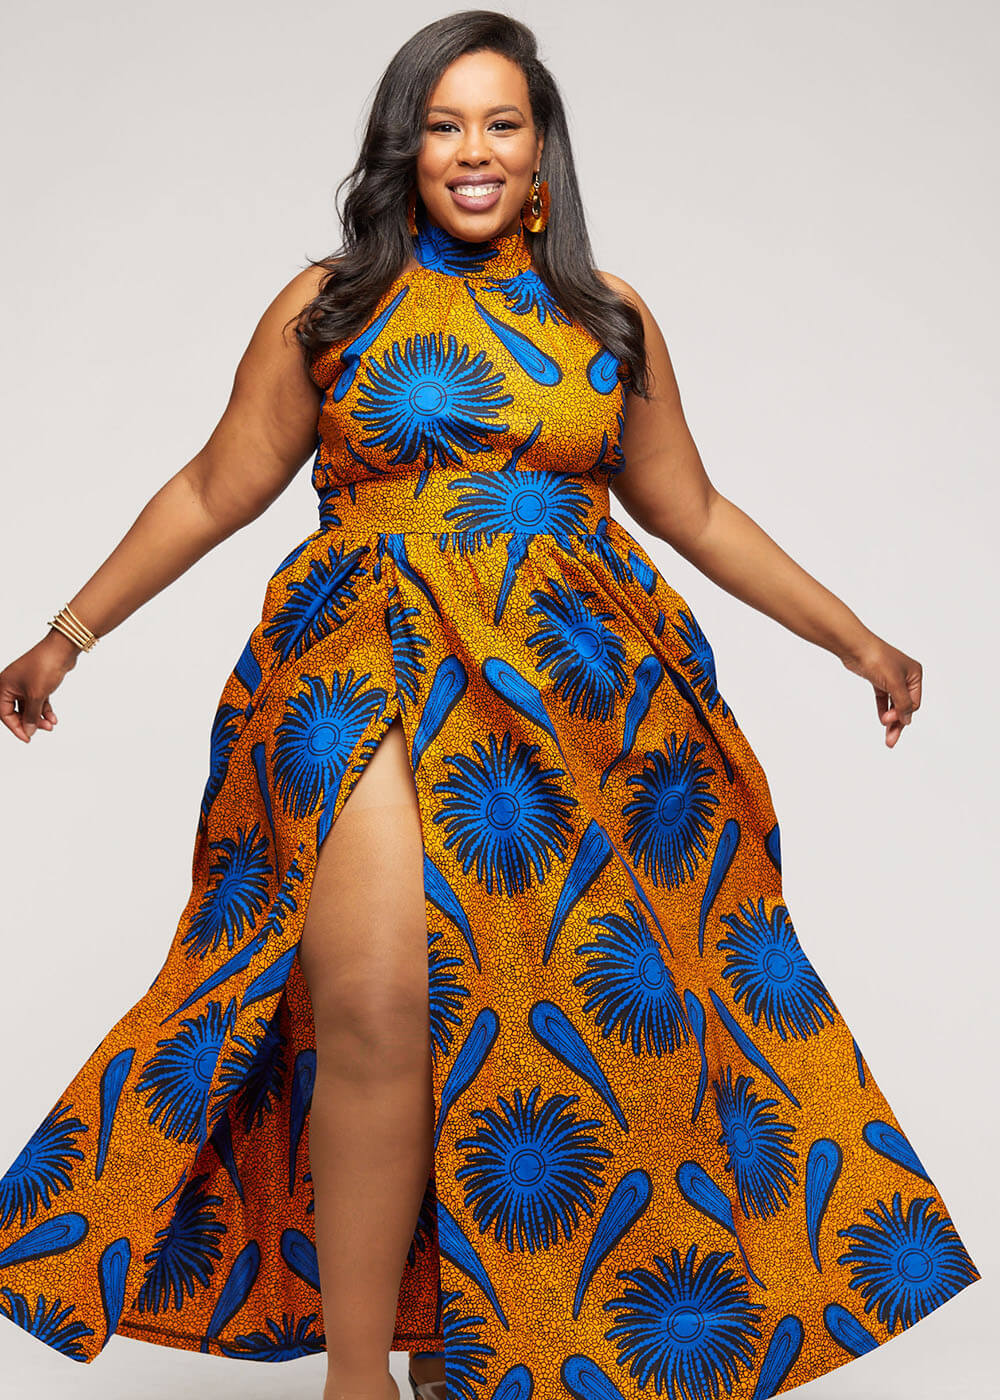 royal blue and gold african dress